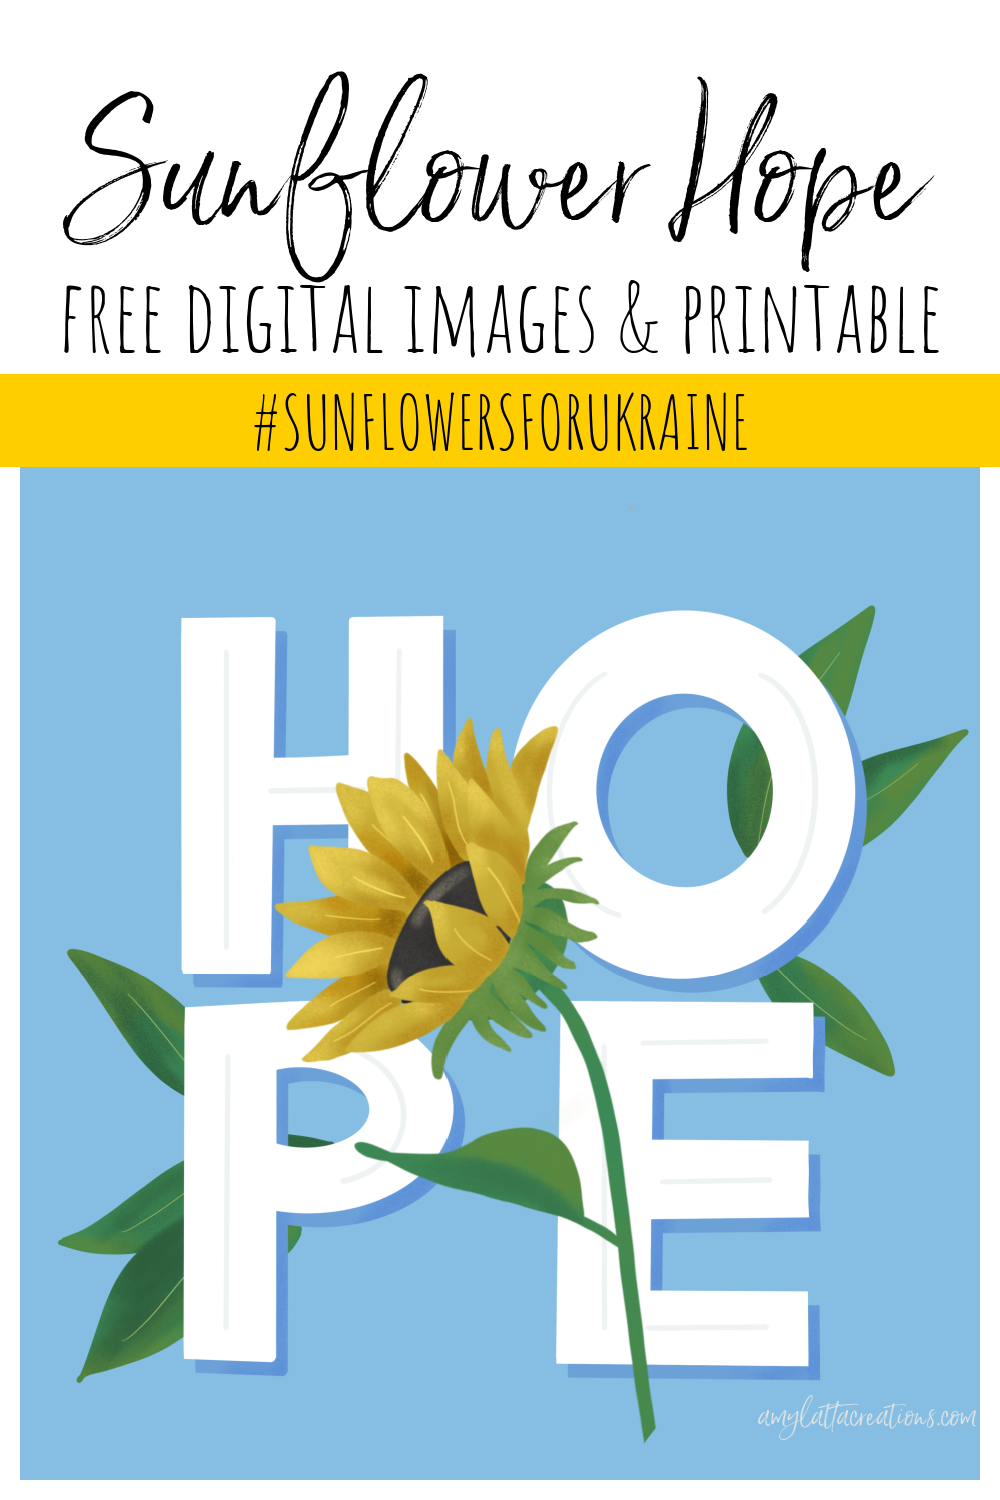 Image contains the word HOPE in white letters on a blue background with a sunflower and green leaves.